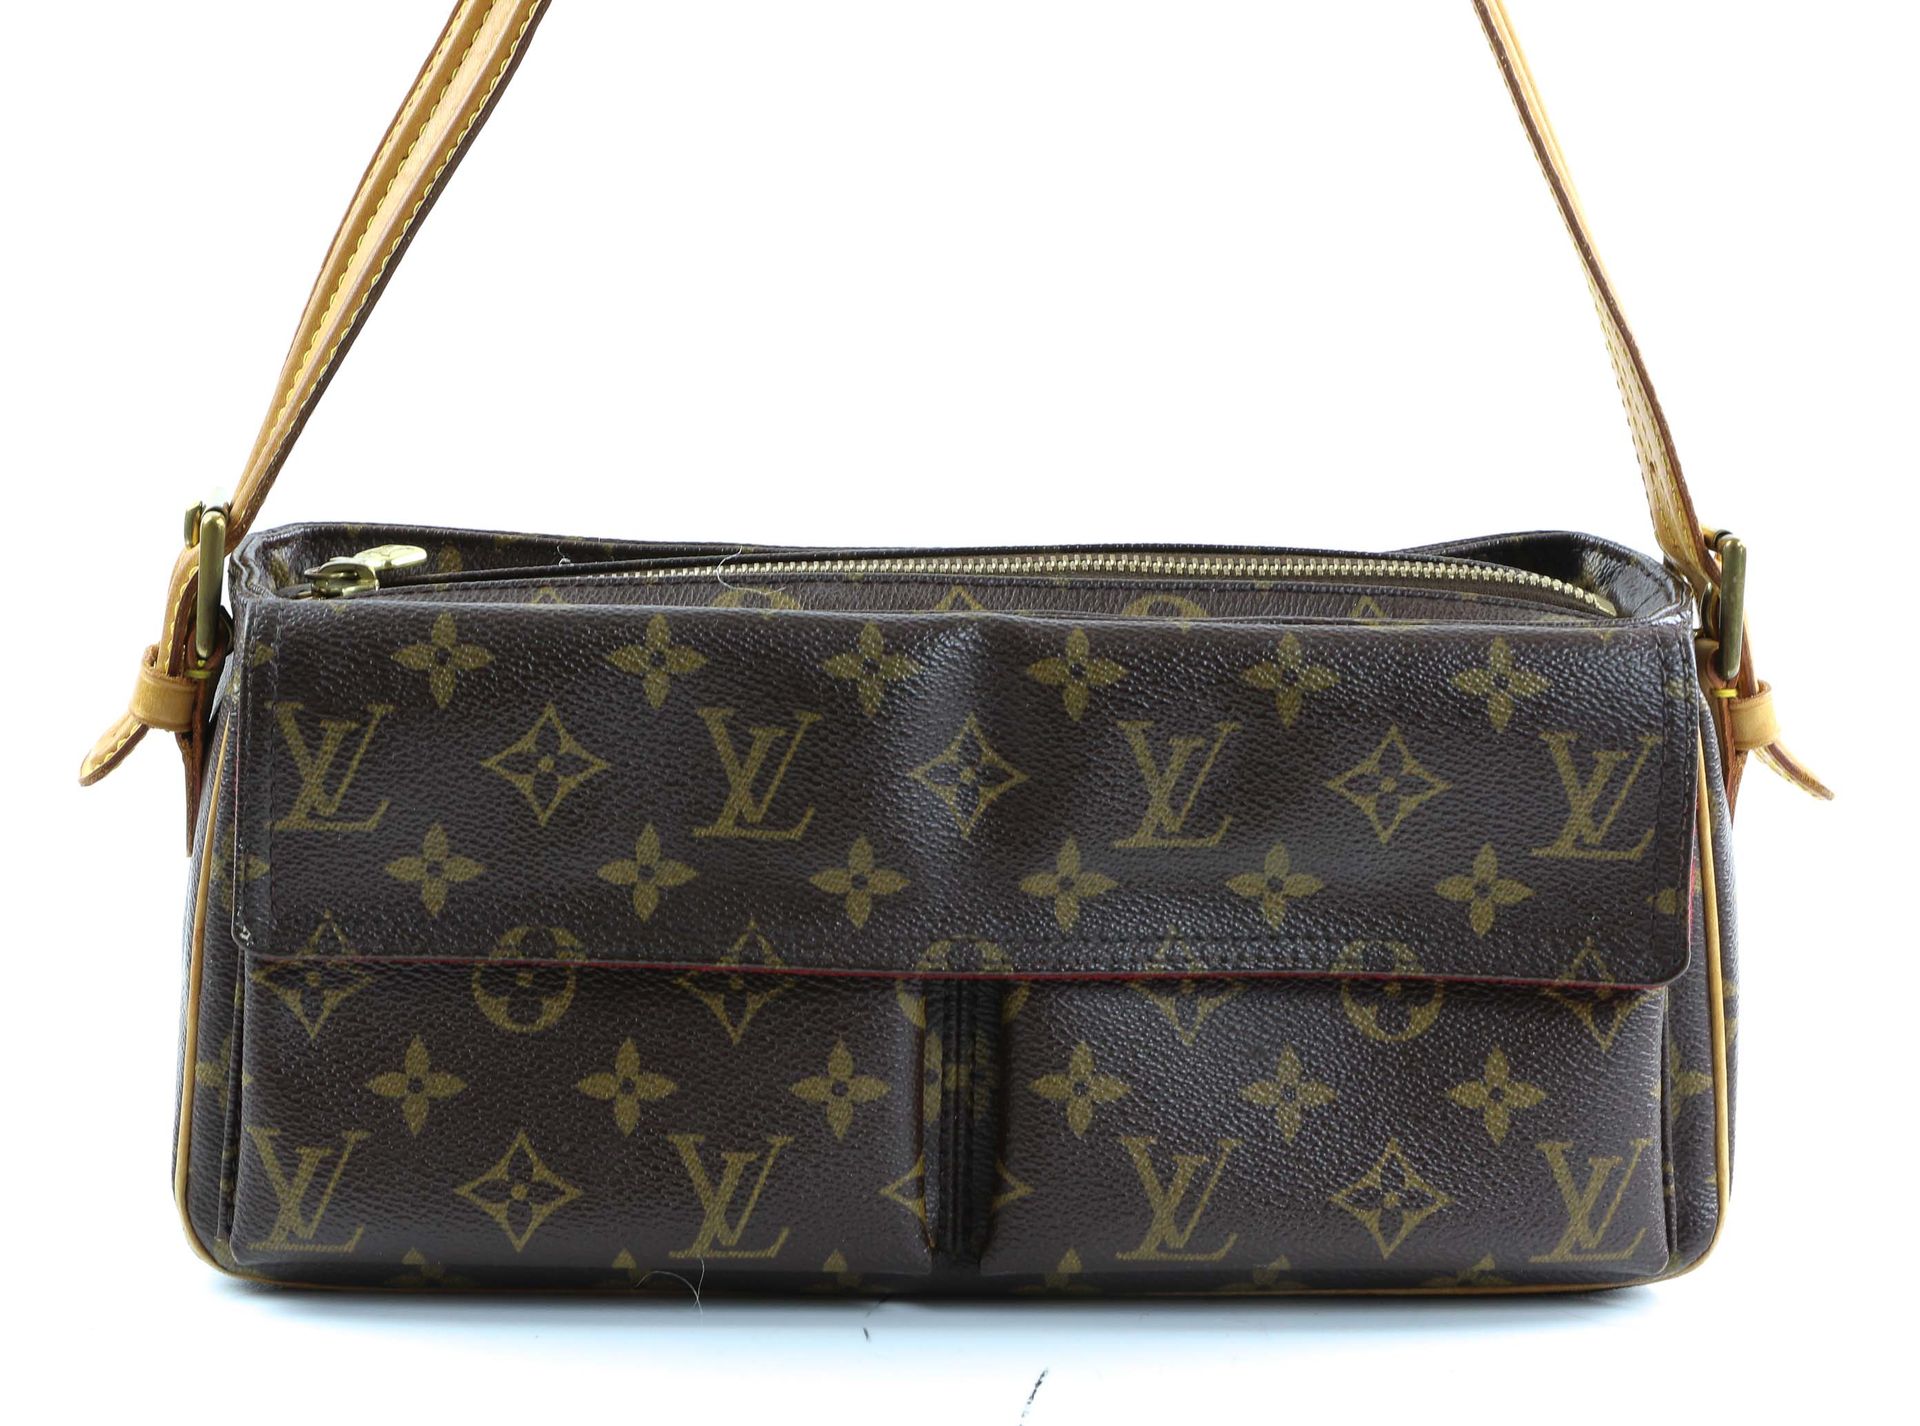 Louis VUITTON - Handle bag in monogrammed canvas and nat…